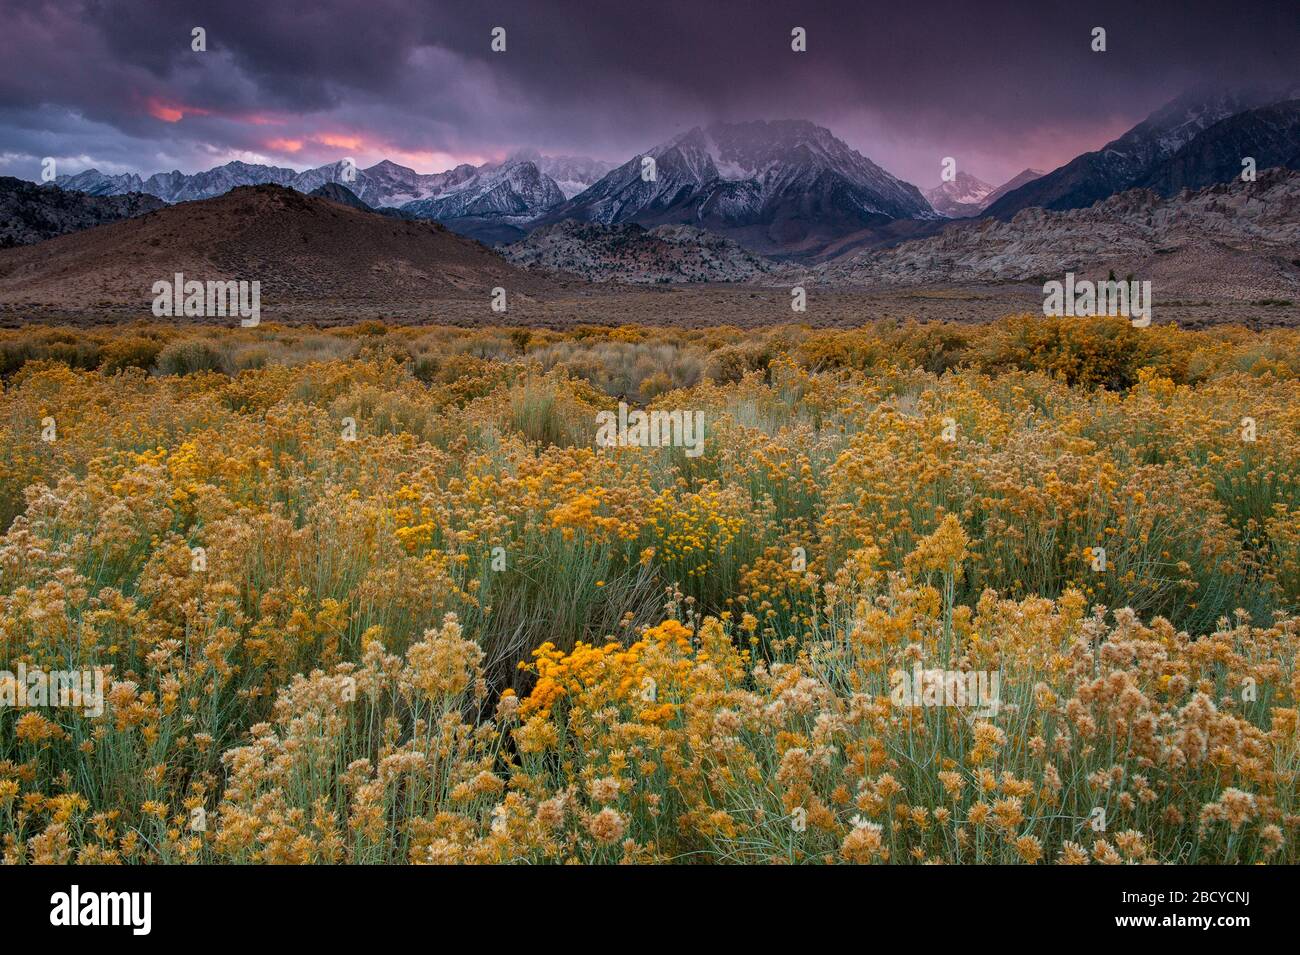 Storm Clouds, Rabbitbrush, The Buttermilks, Mount Humphries, Basin Mountain, Mount Tom, Bishop Creek National Recreation Area, Inyo National Forest, C Stock Photo